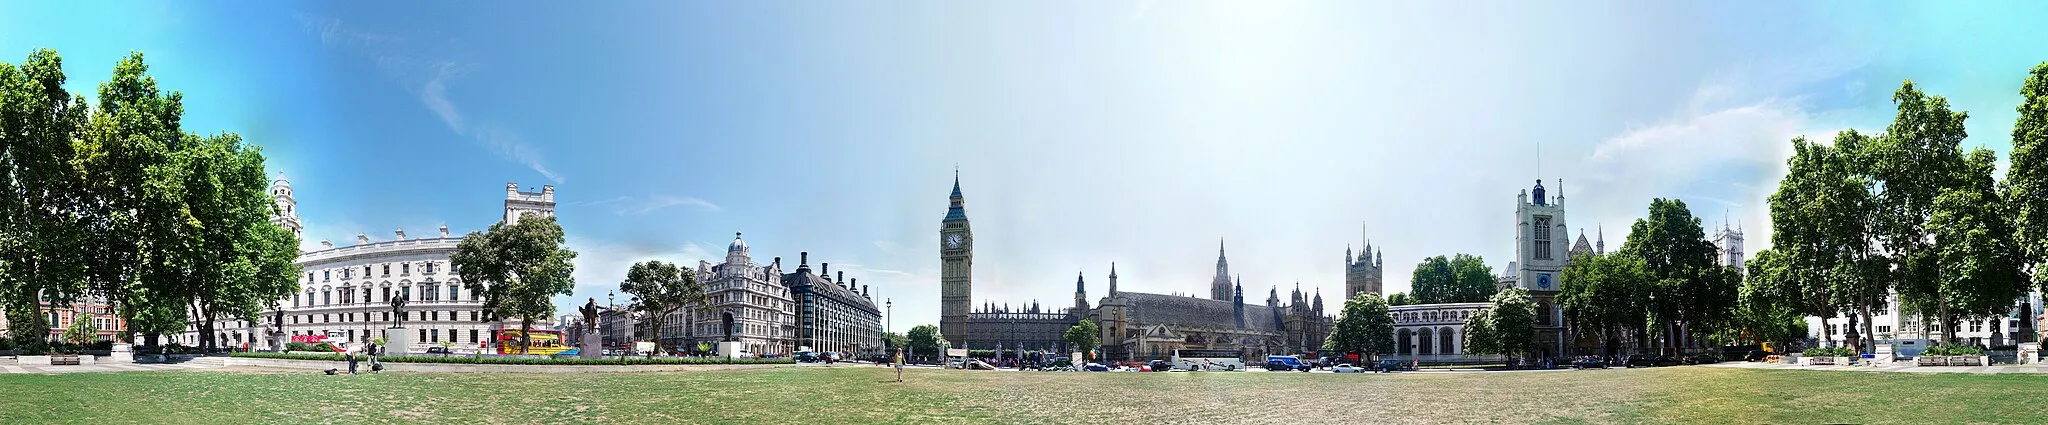 Photo showing: Scaled down version of the half gigapixel[1] 360 degree view of parliament square in central London